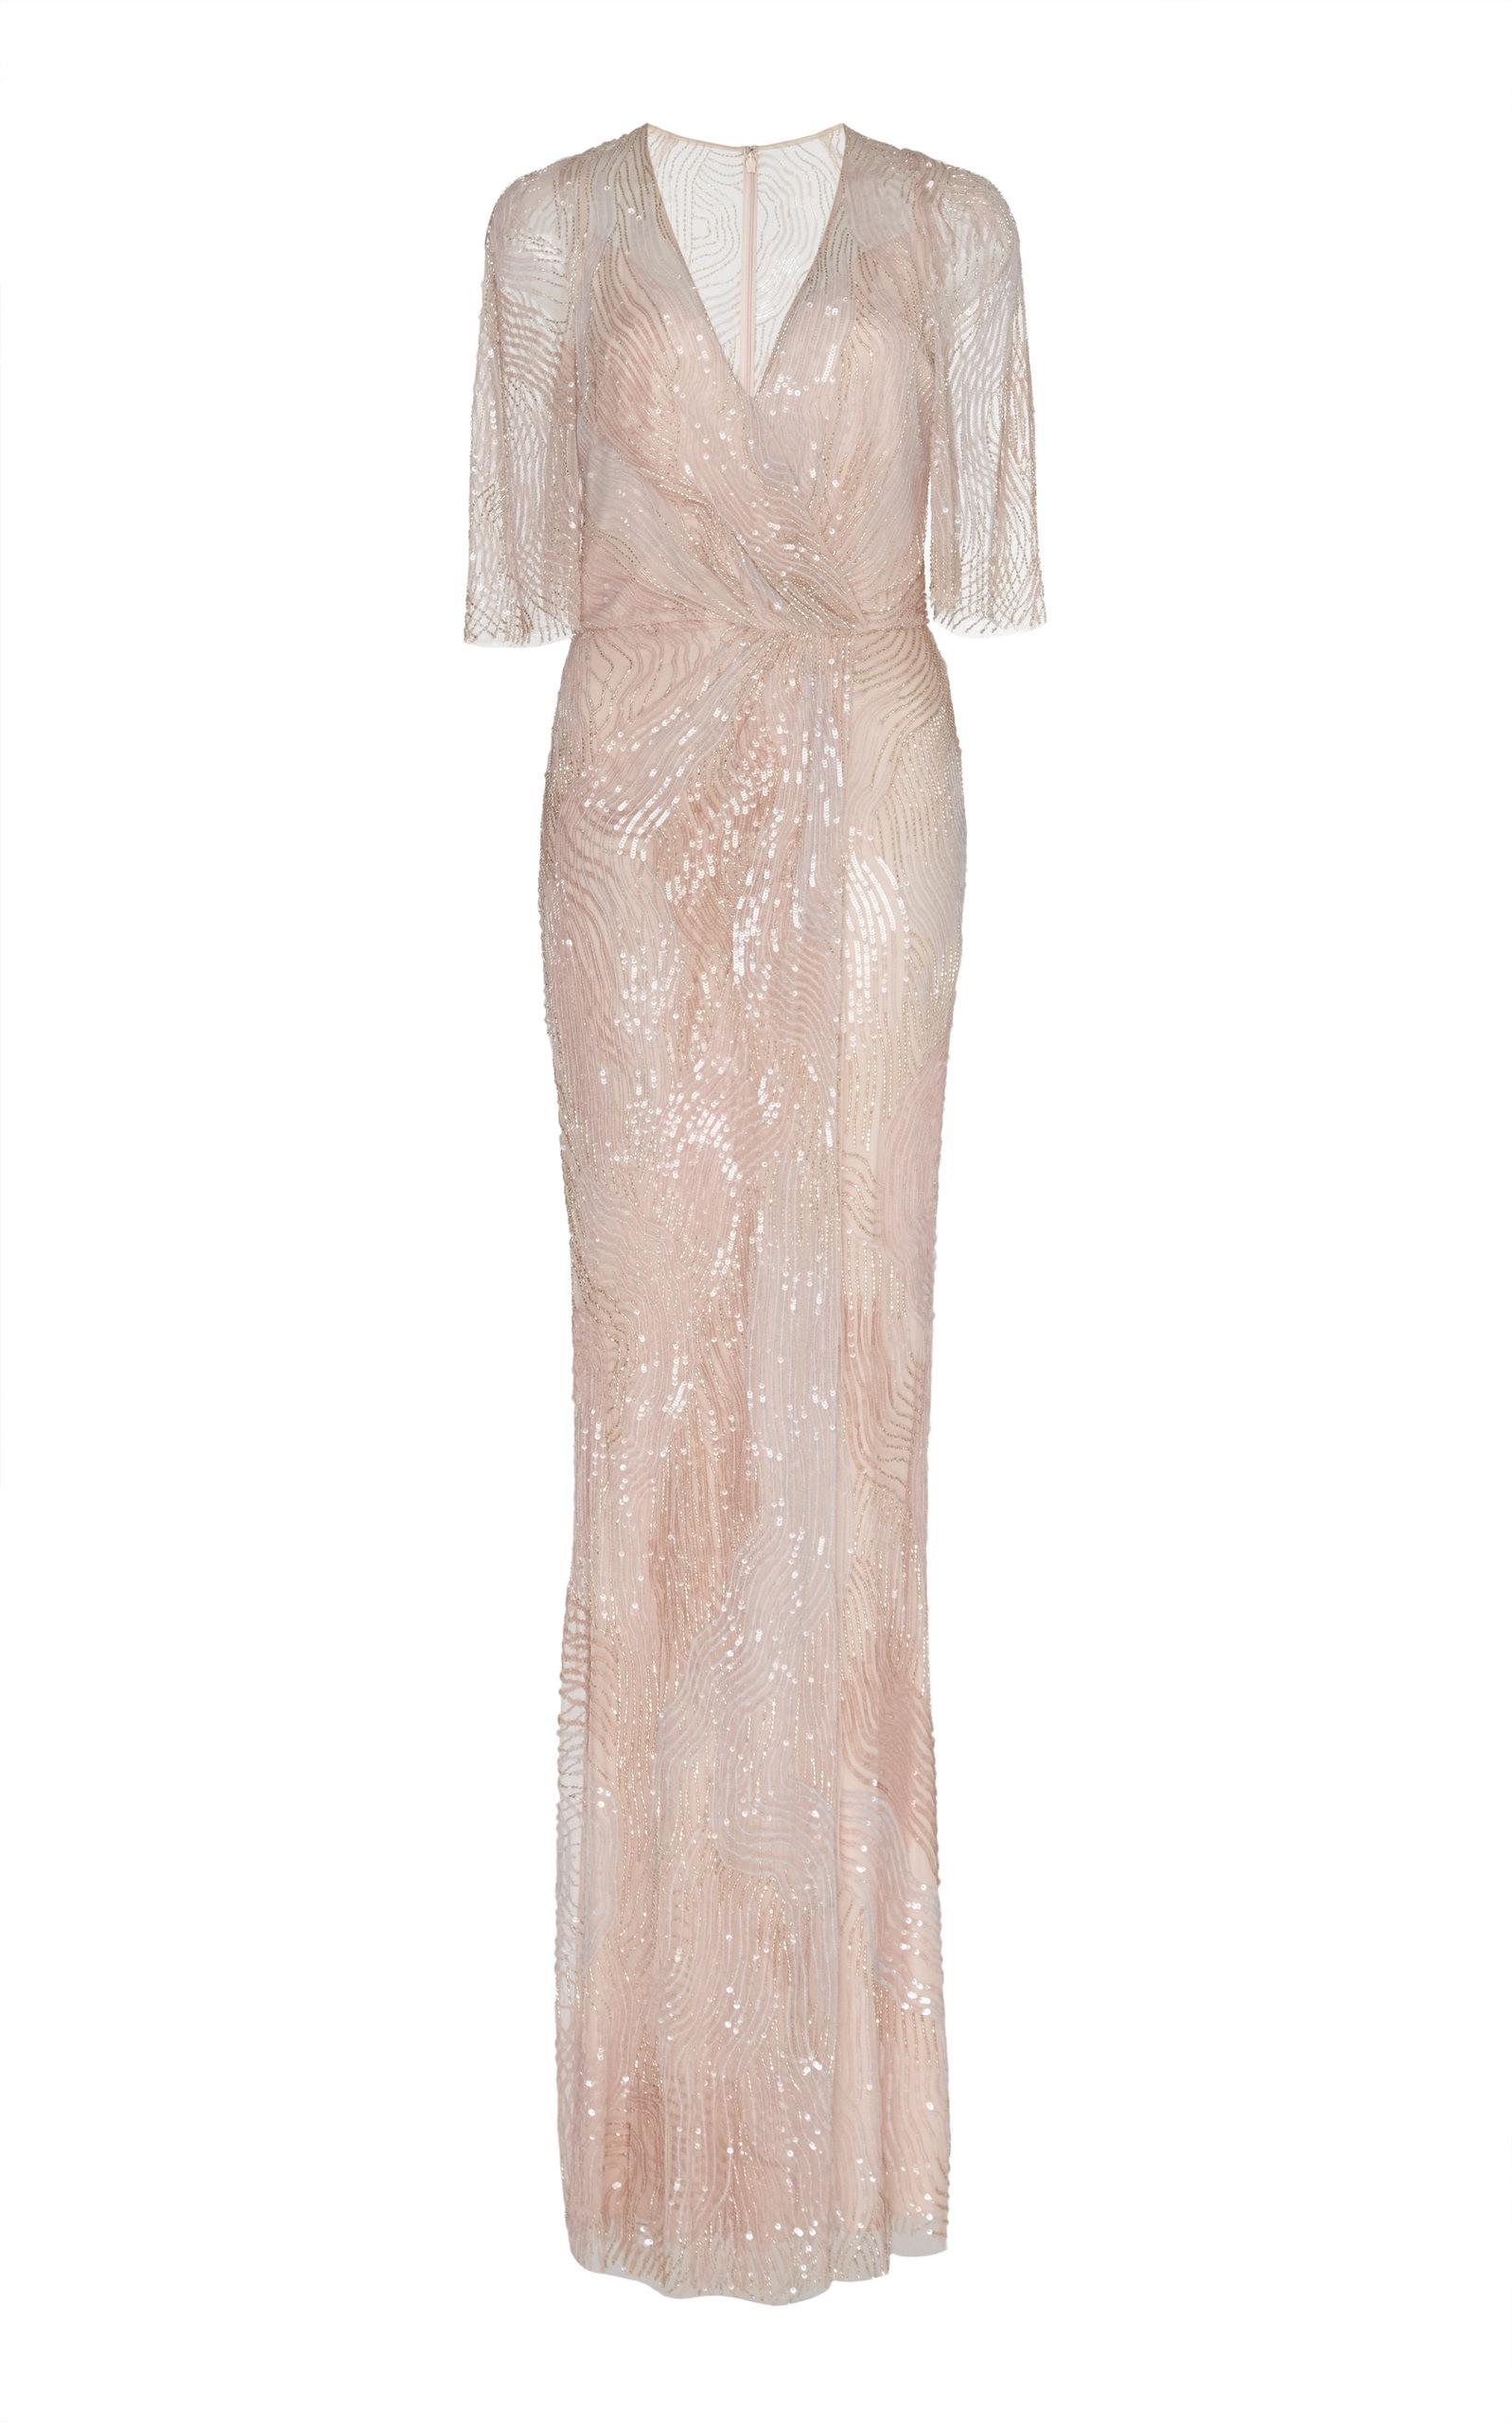 Jenny Packham Tulle Dana Quart Sleeve Gathered Gown in Pink - Lyst